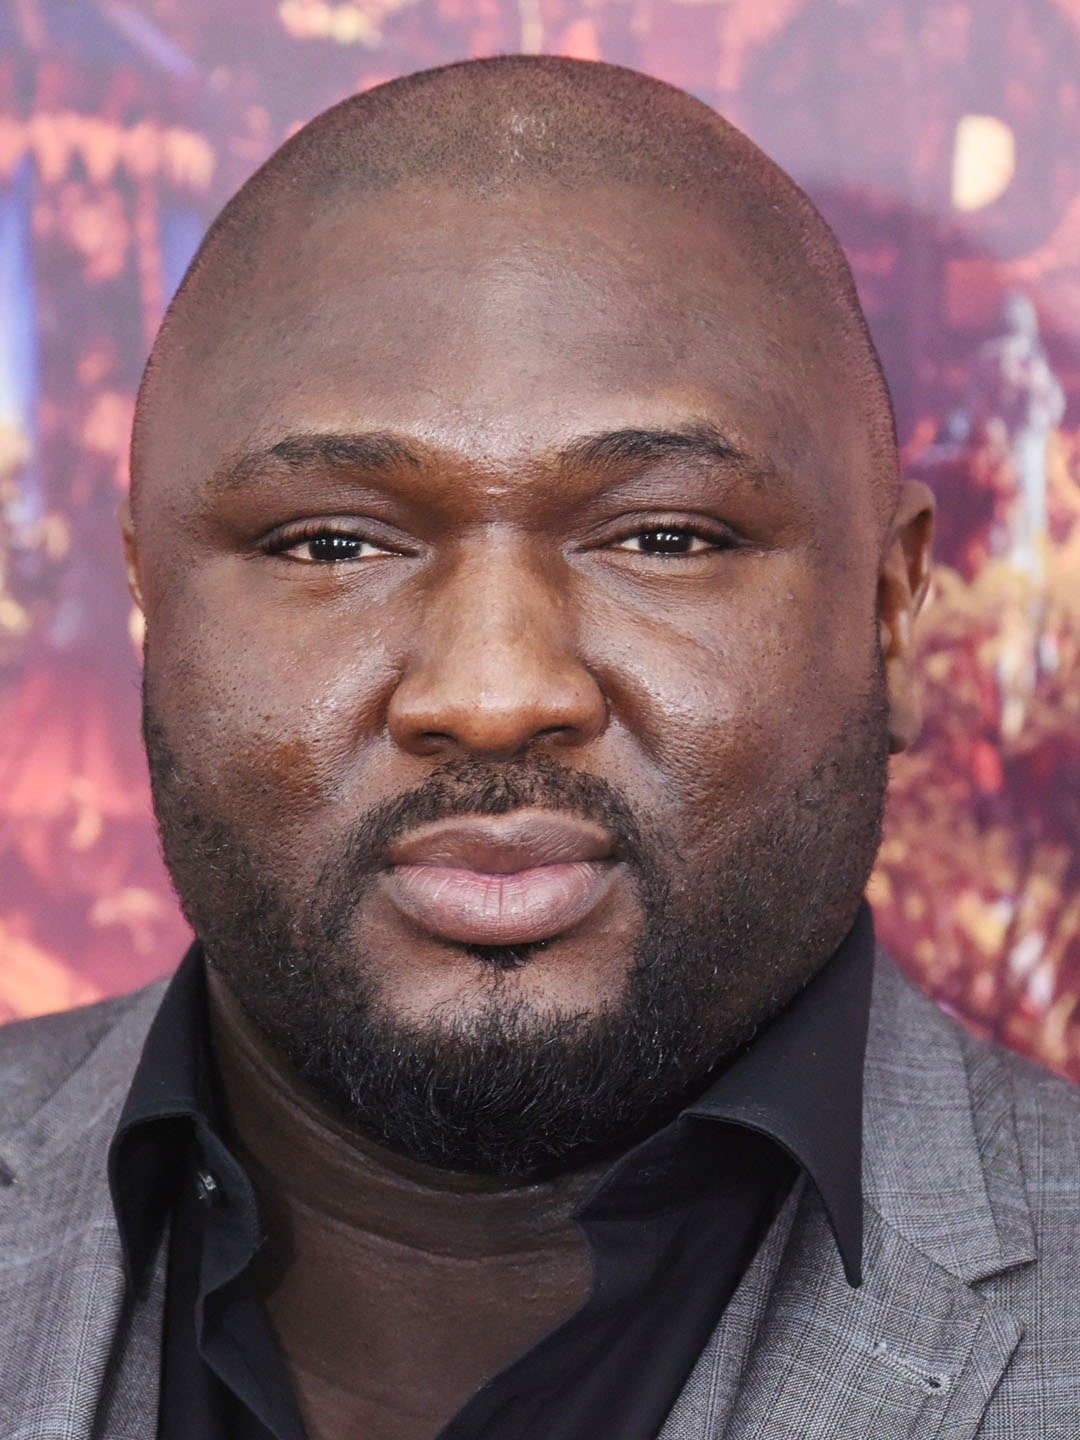 How tall is Nonso Anozie?